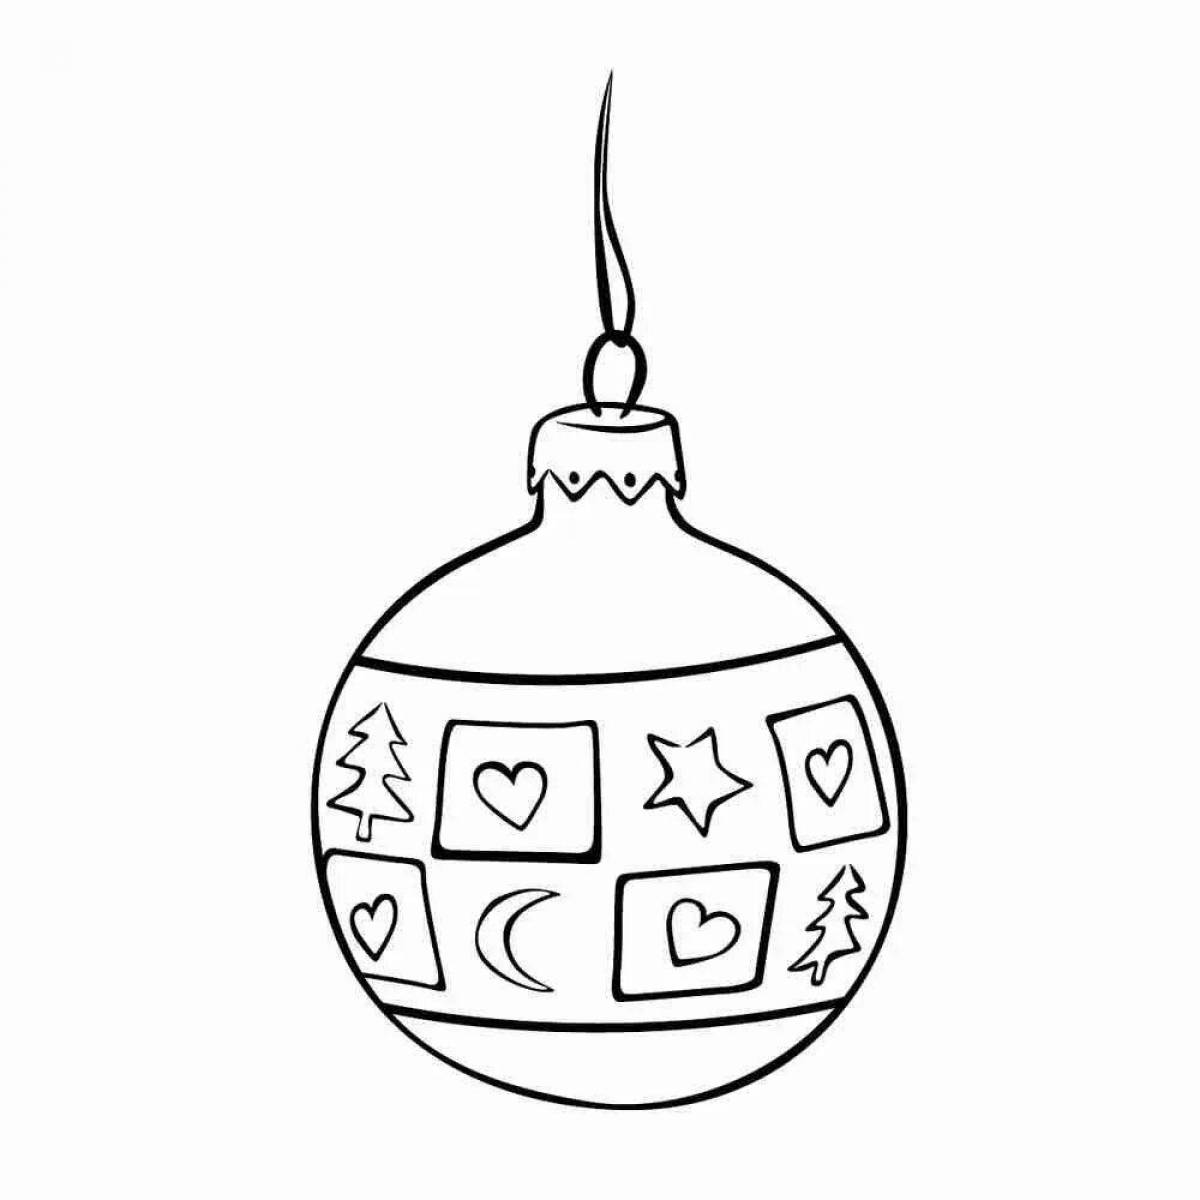 Coloring book magical christmas ball for kids